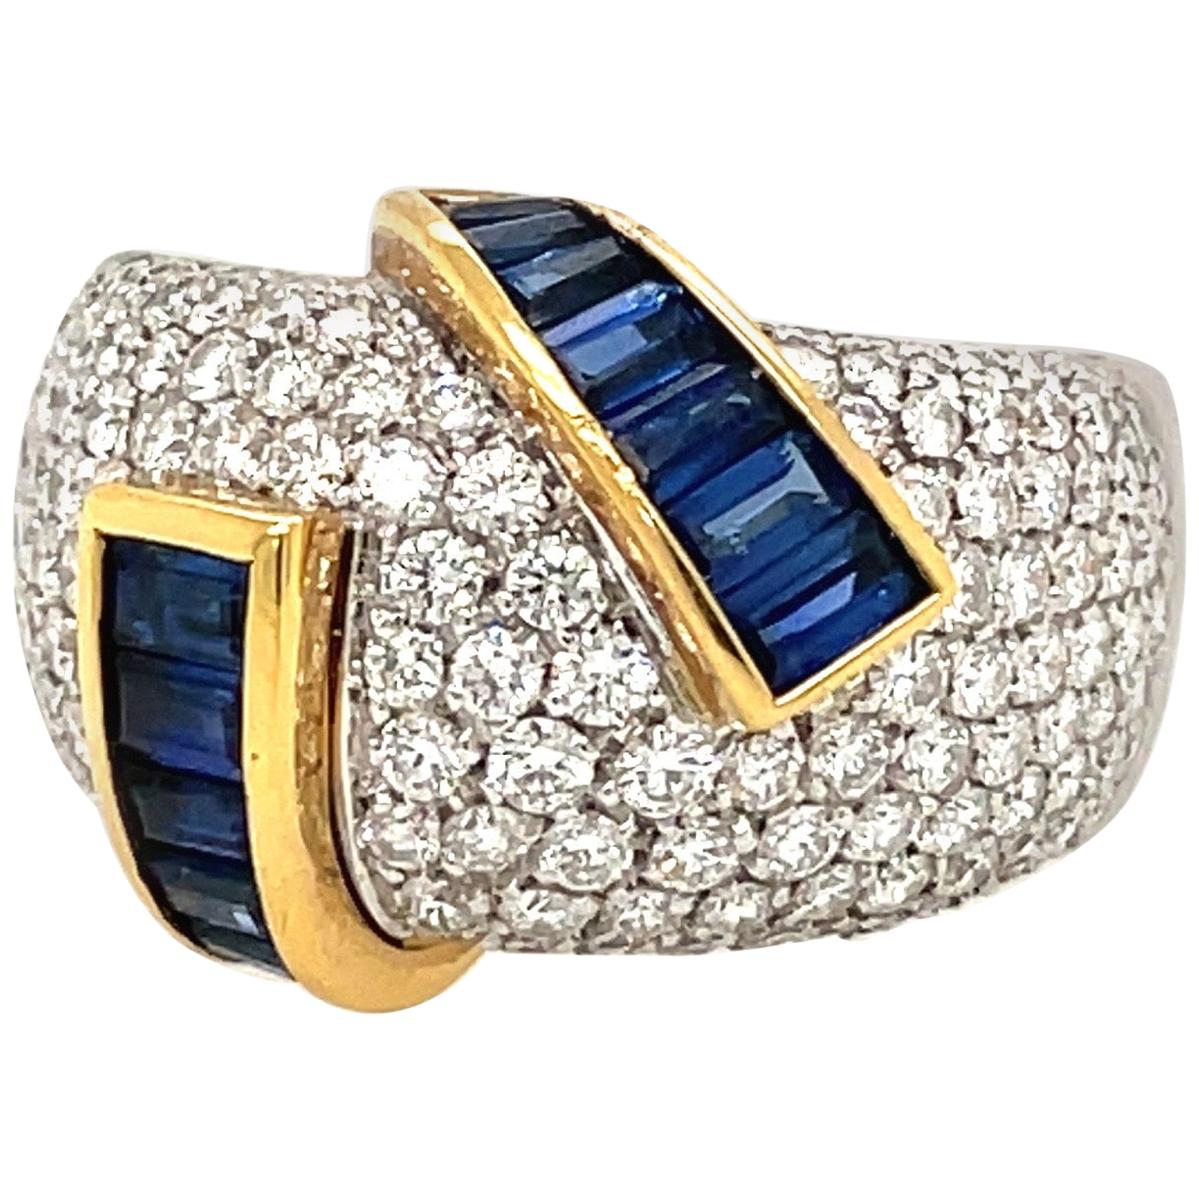 Alfiere & St. John 18KT Gold, Diamond 1.99 Carat and Blue Sapphire 2.15Ct. Ring For Sale